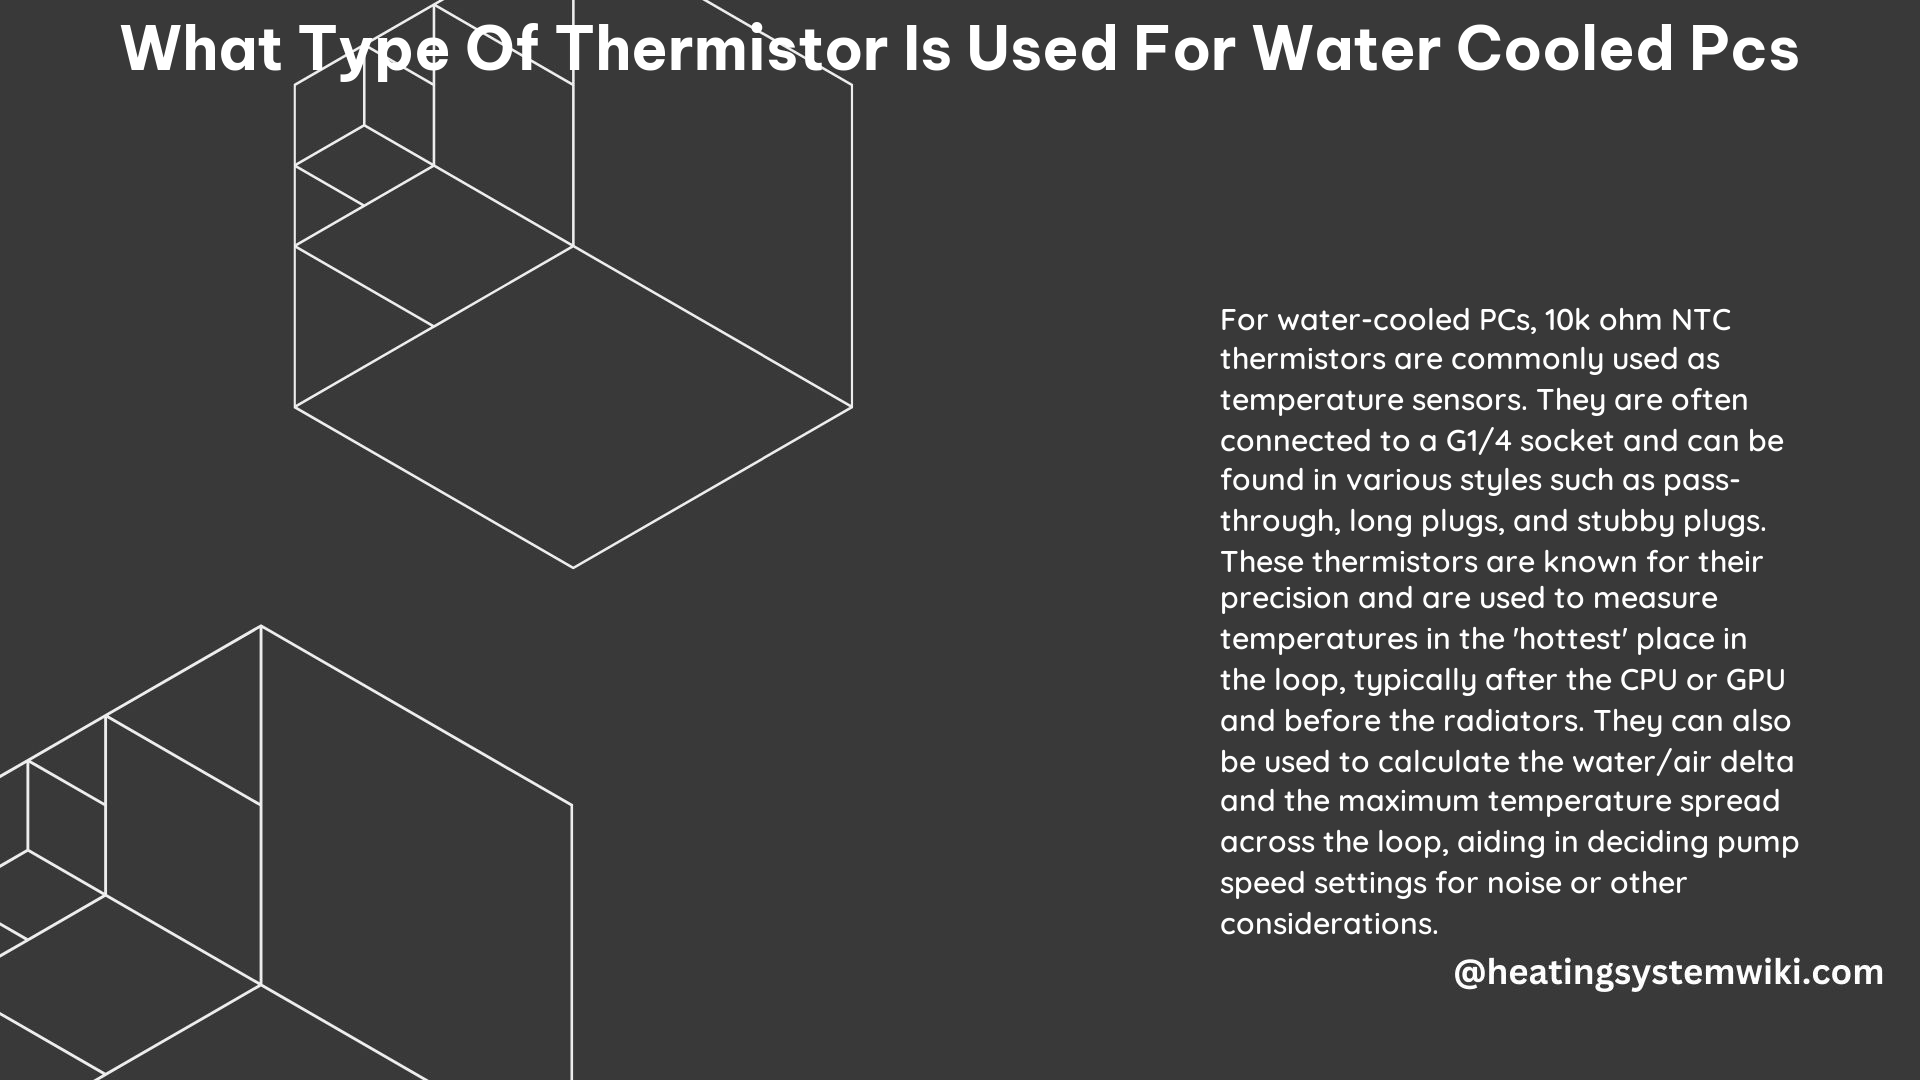 What Type of Thermistor Is Used for Water Cooled PCs